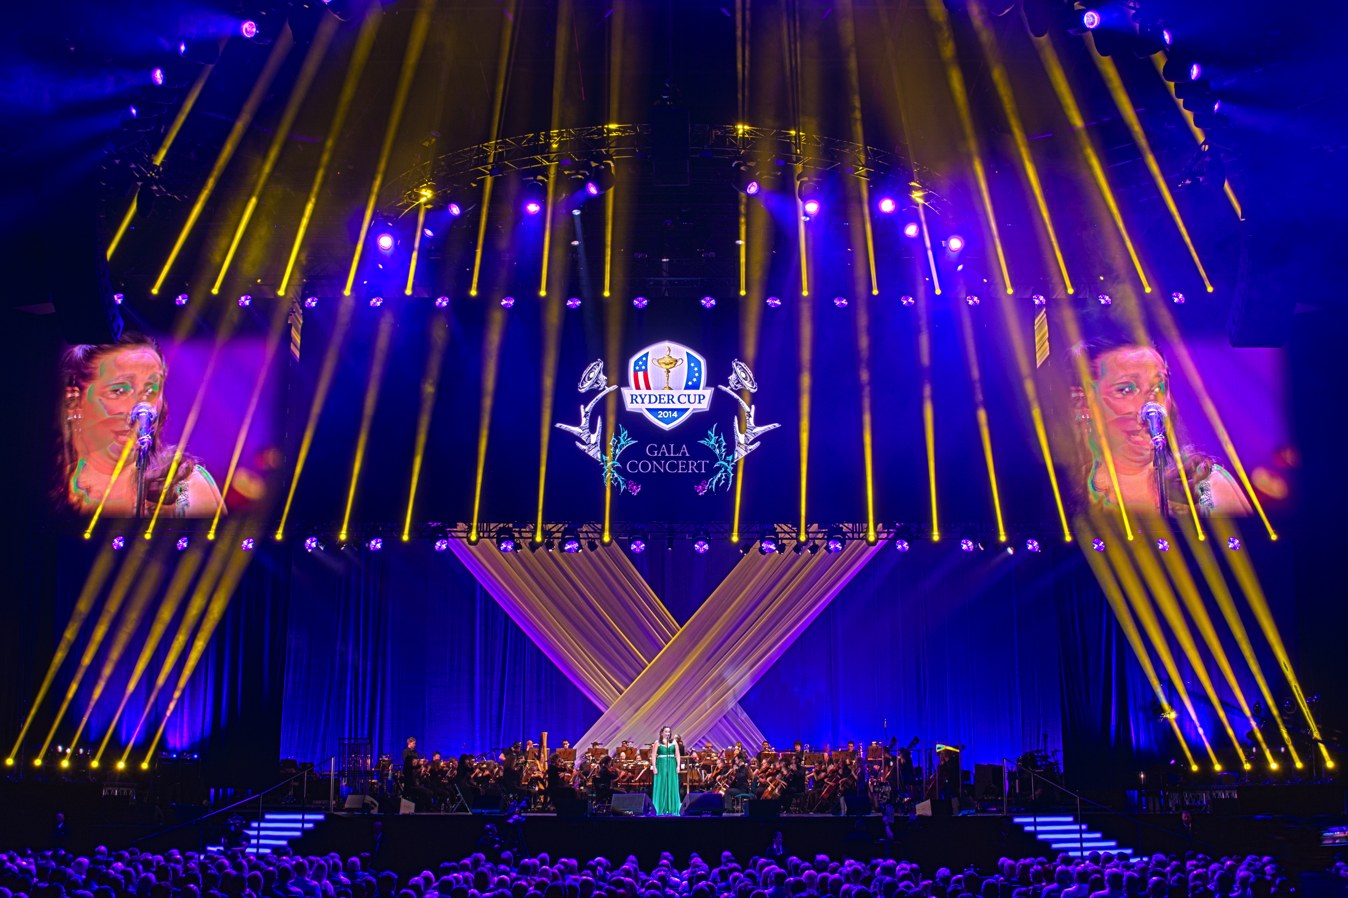 Ryder Cup Opening Gala Concert 2014